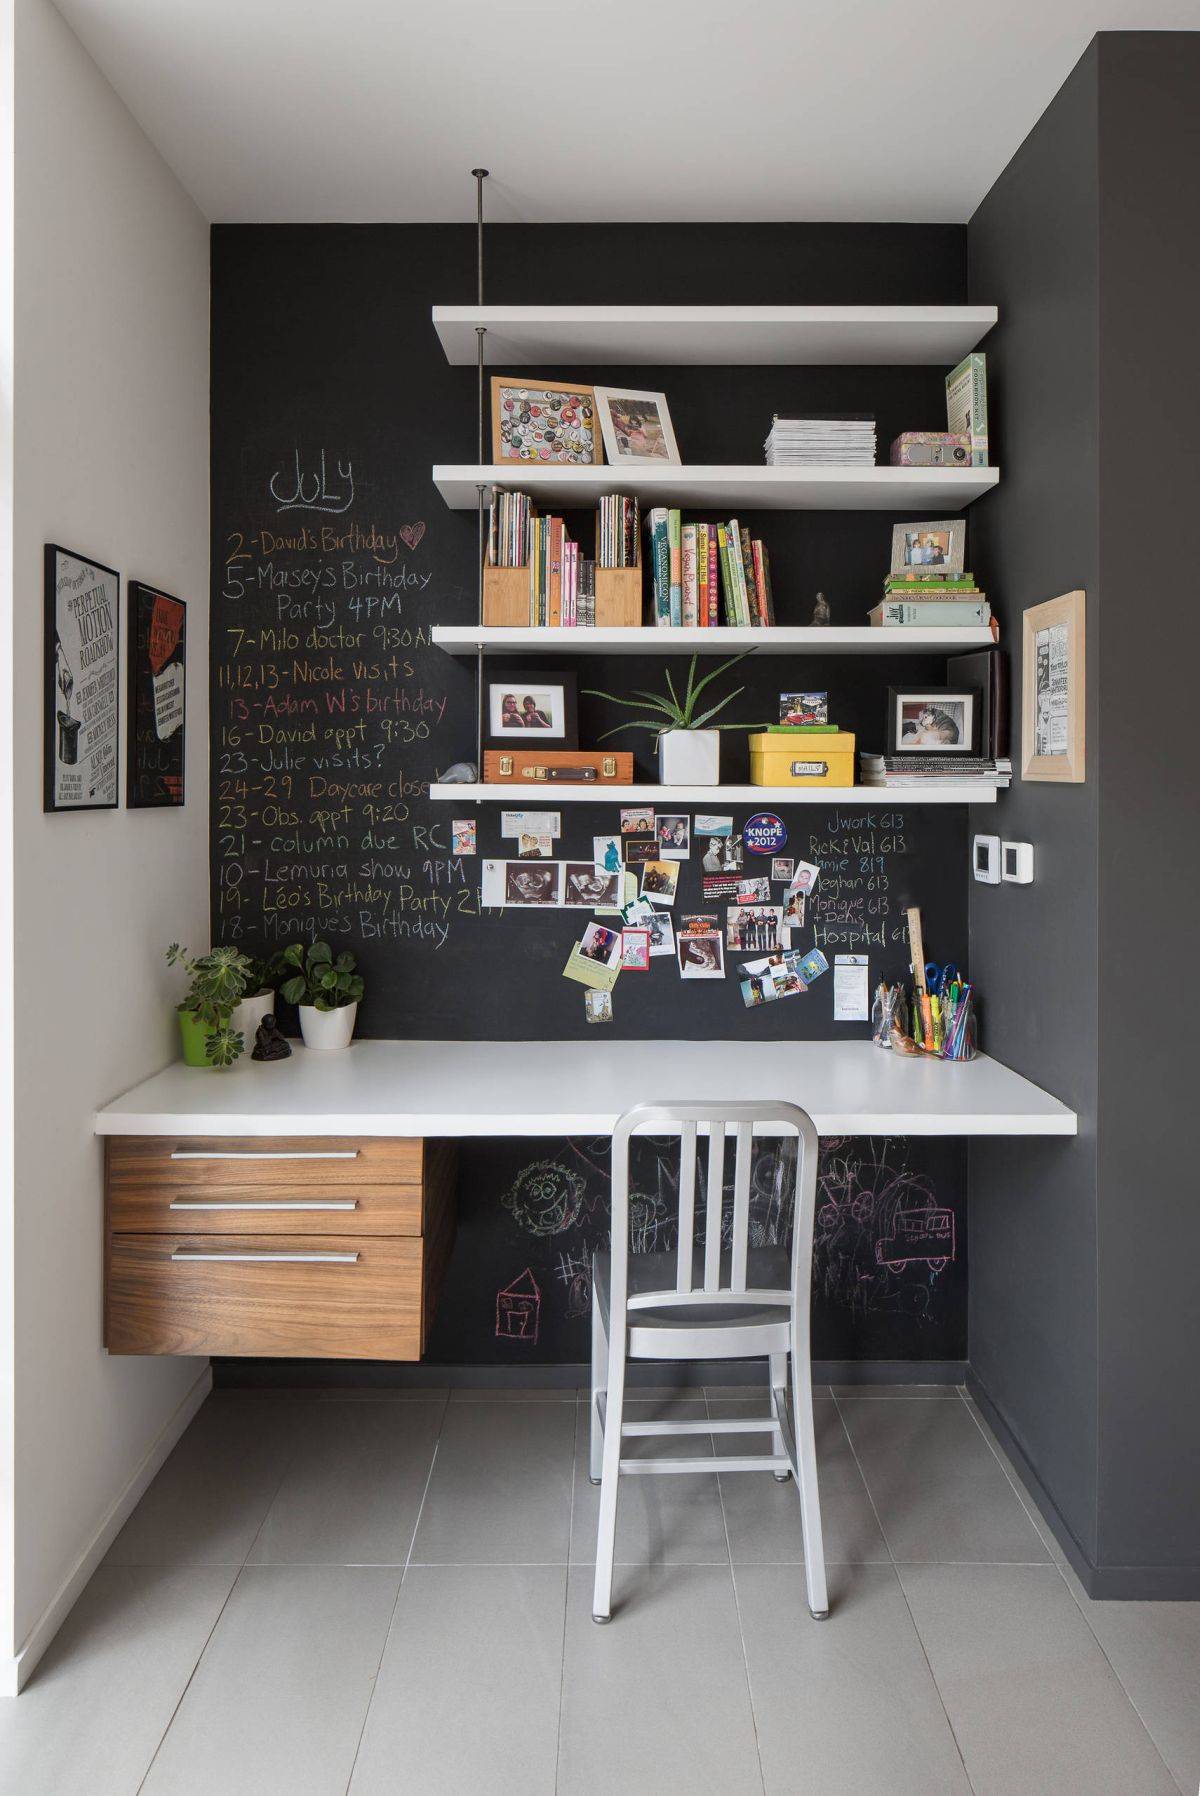 Chalkboard-wall-and-an-adaptable-desk-design-with-storage-makes-for-a-convenient-home-office-92403